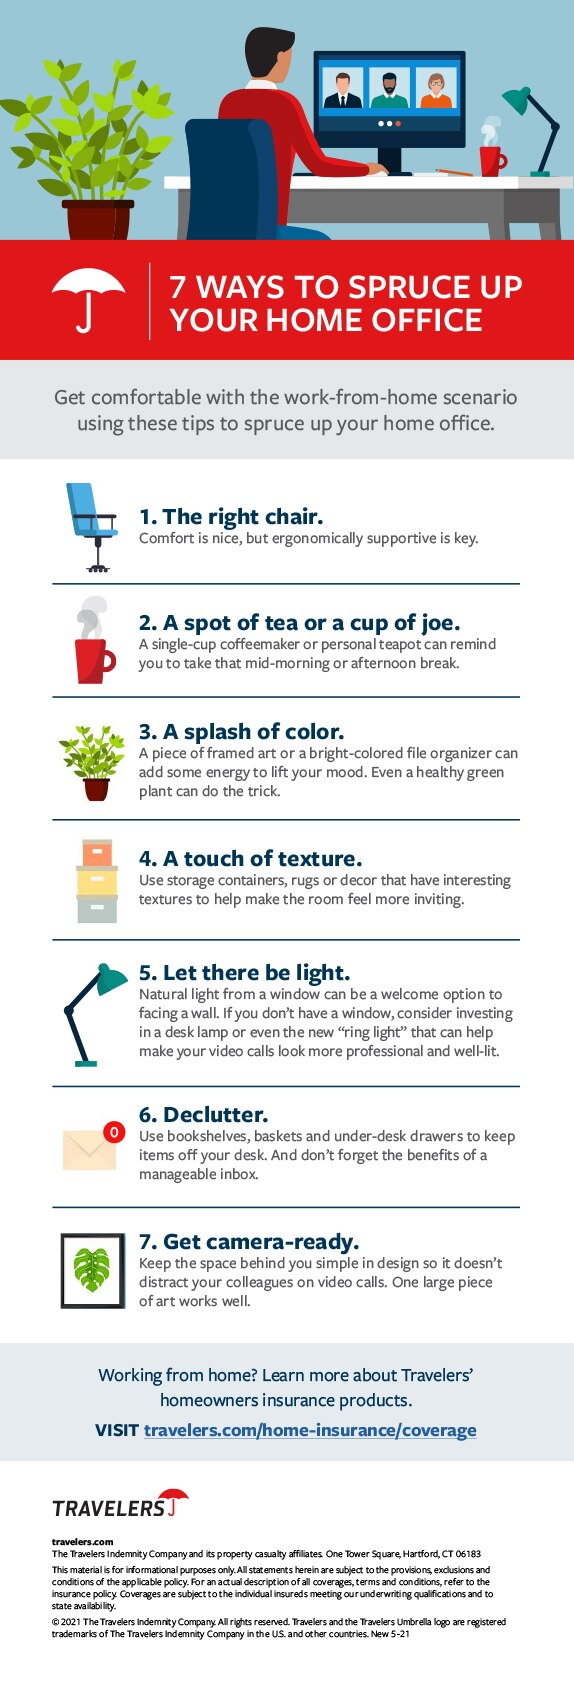 https://www.travelers.com/iw-images/resources/Business/Large/business-industries/small-business/7-ways-to-spruce-up-home-office-infographic.jpg